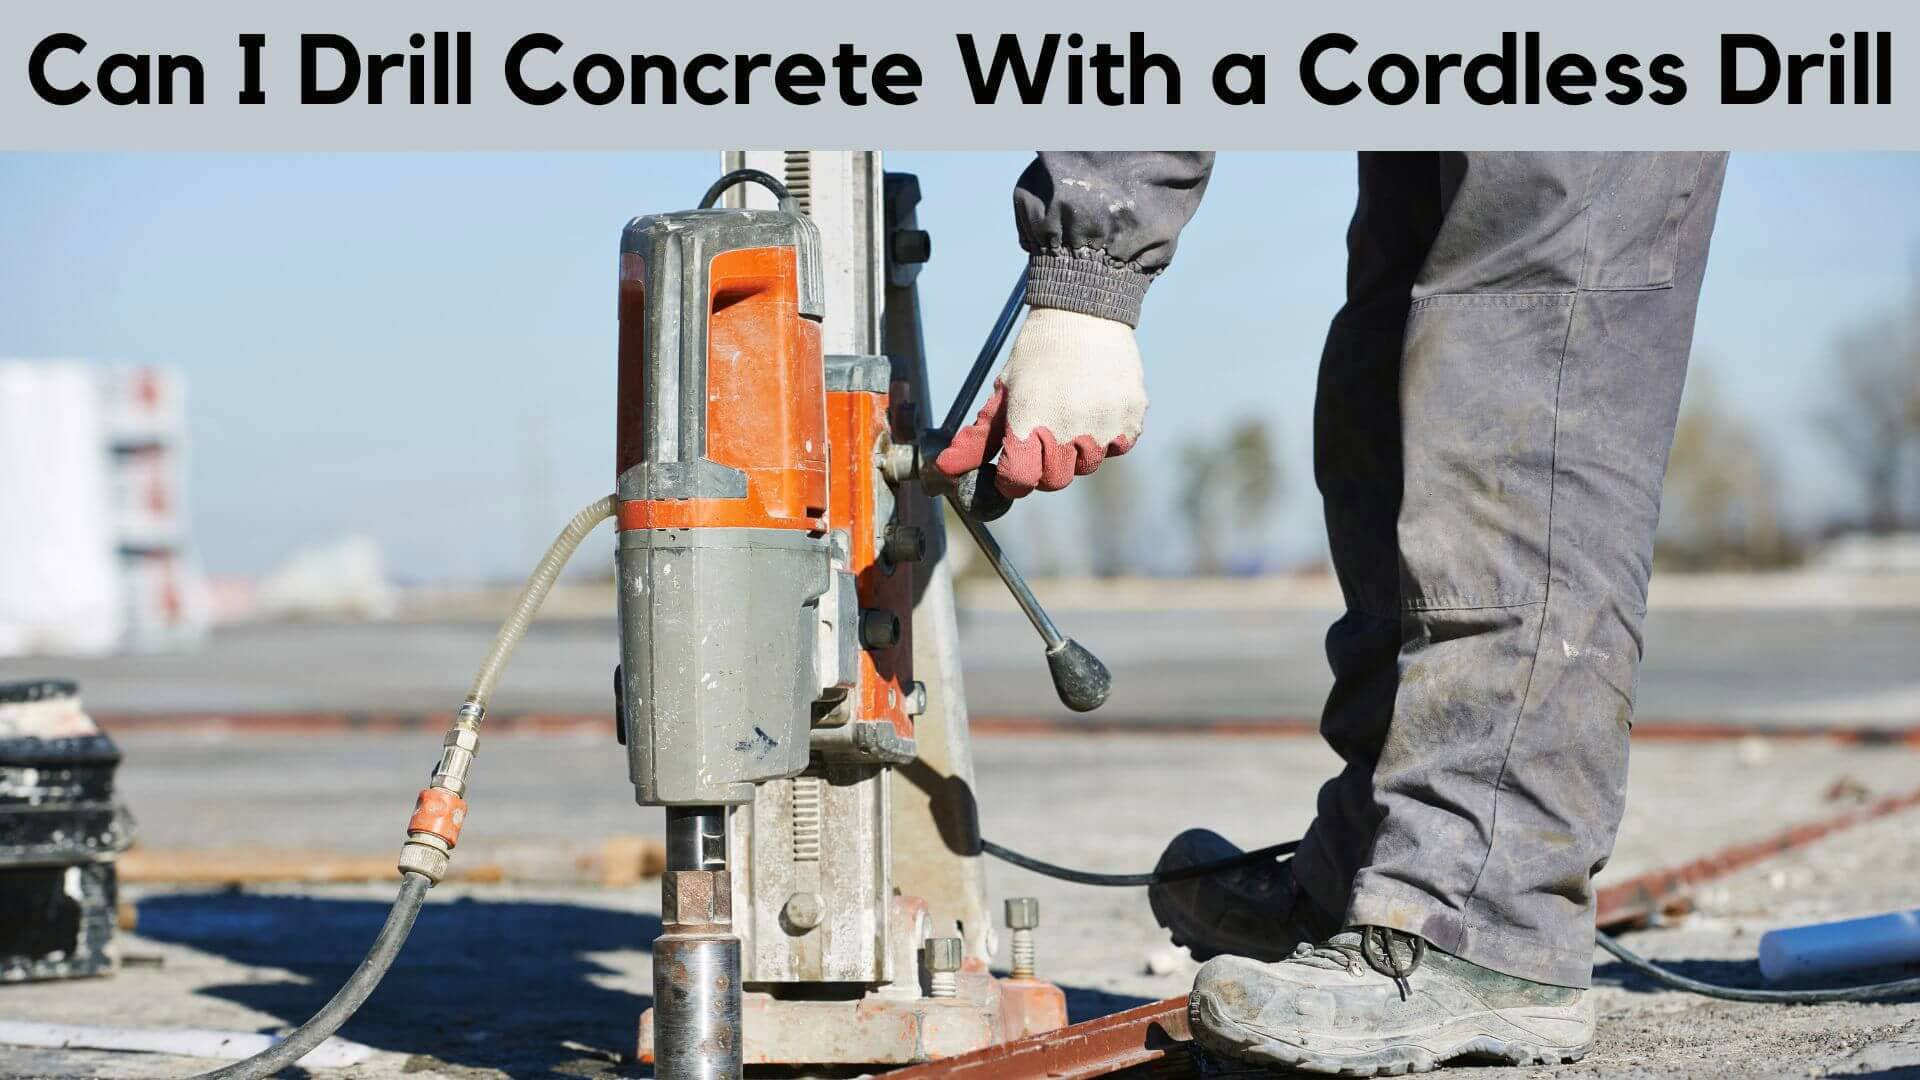 Can I Drill Concrete with a Cordless Drill?